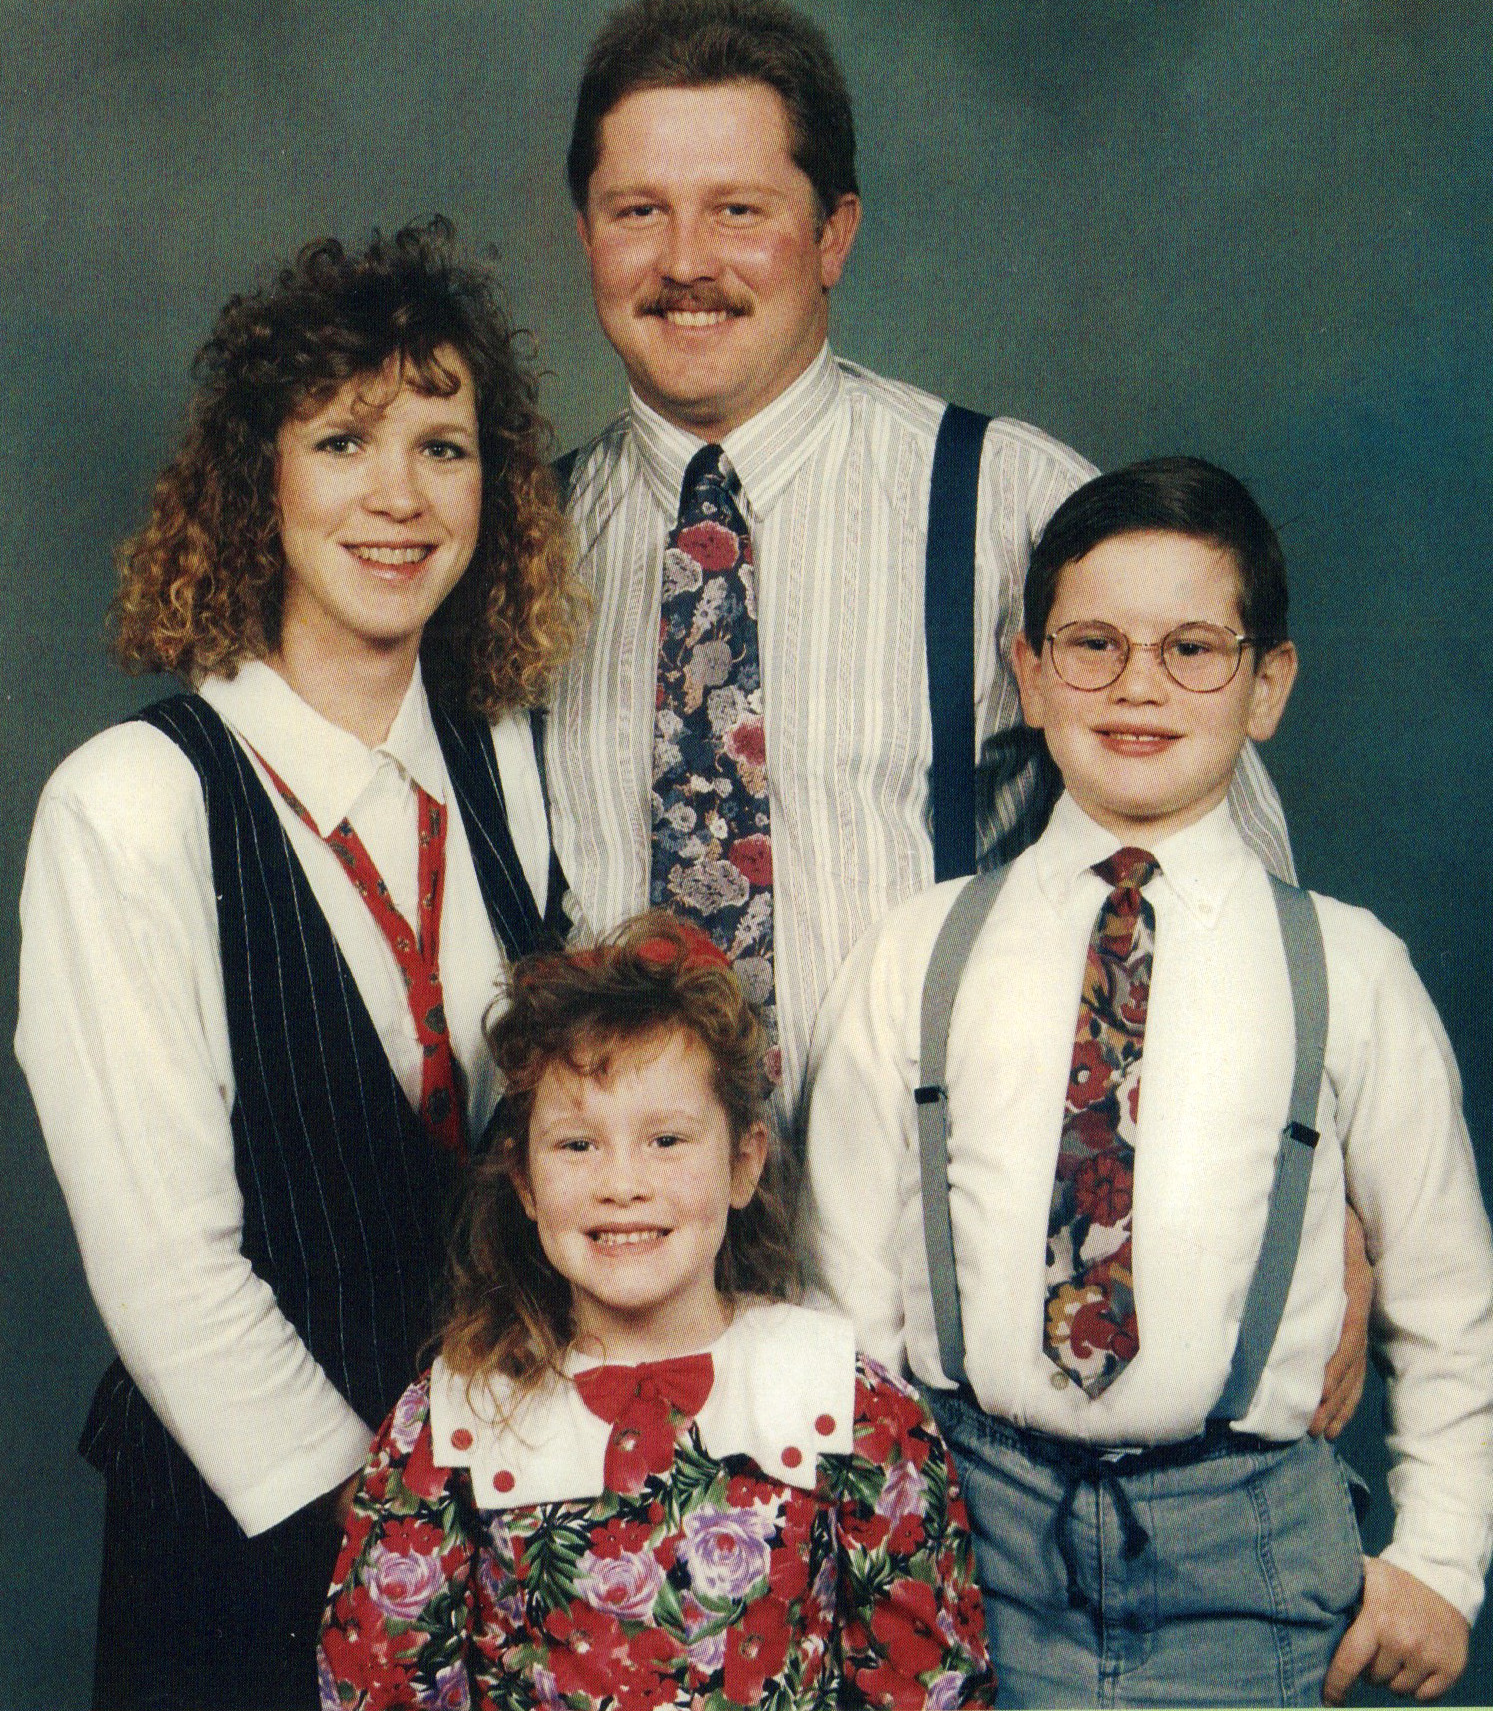 Awkward Family Portraits of Yesteryear